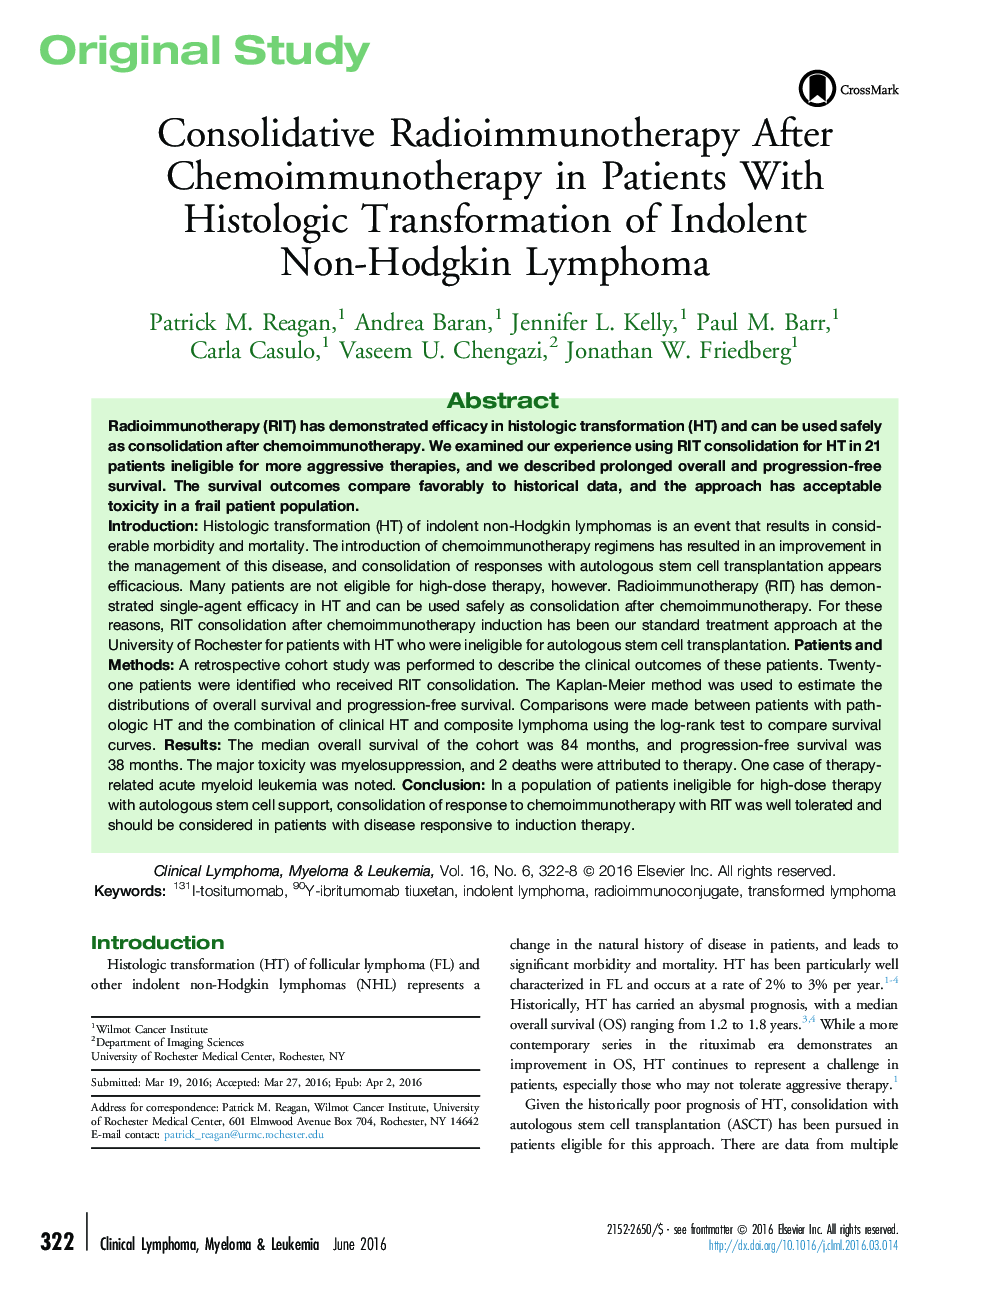 Consolidative Radioimmunotherapy After Chemoimmunotherapy in Patients With Histologic Transformation of Indolent Non-Hodgkin Lymphoma